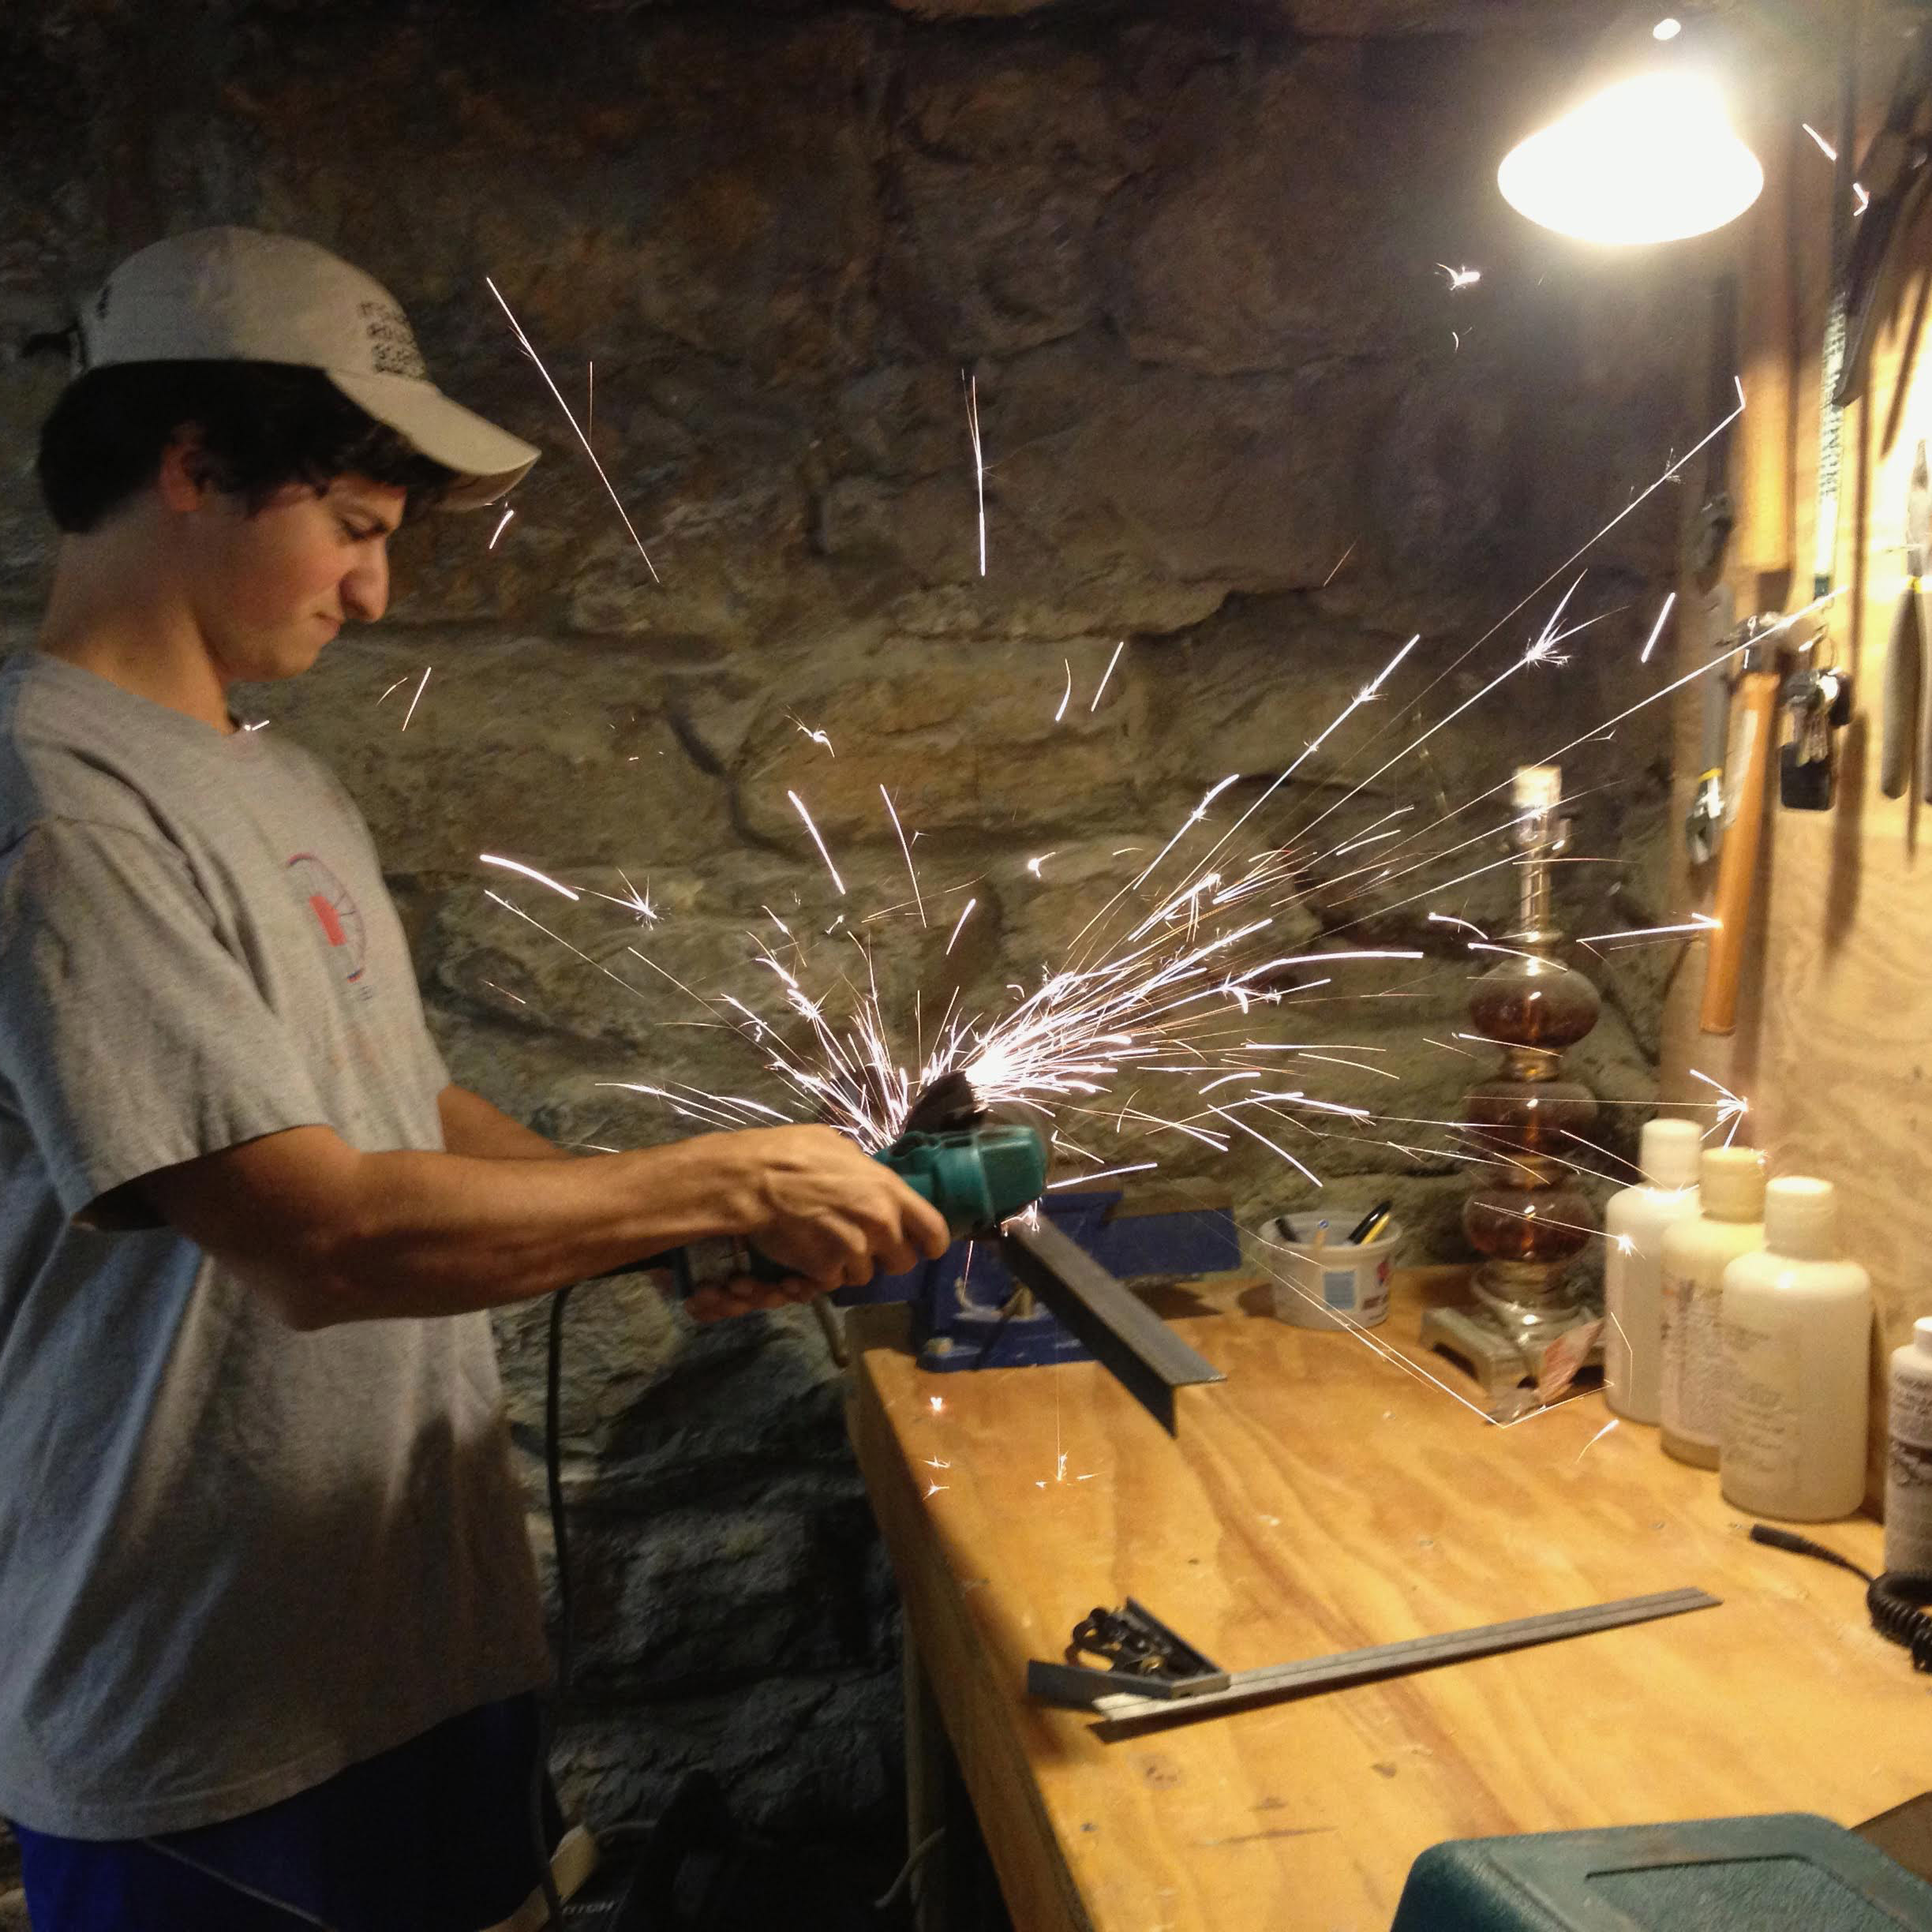 austin cutting metal with a grinder